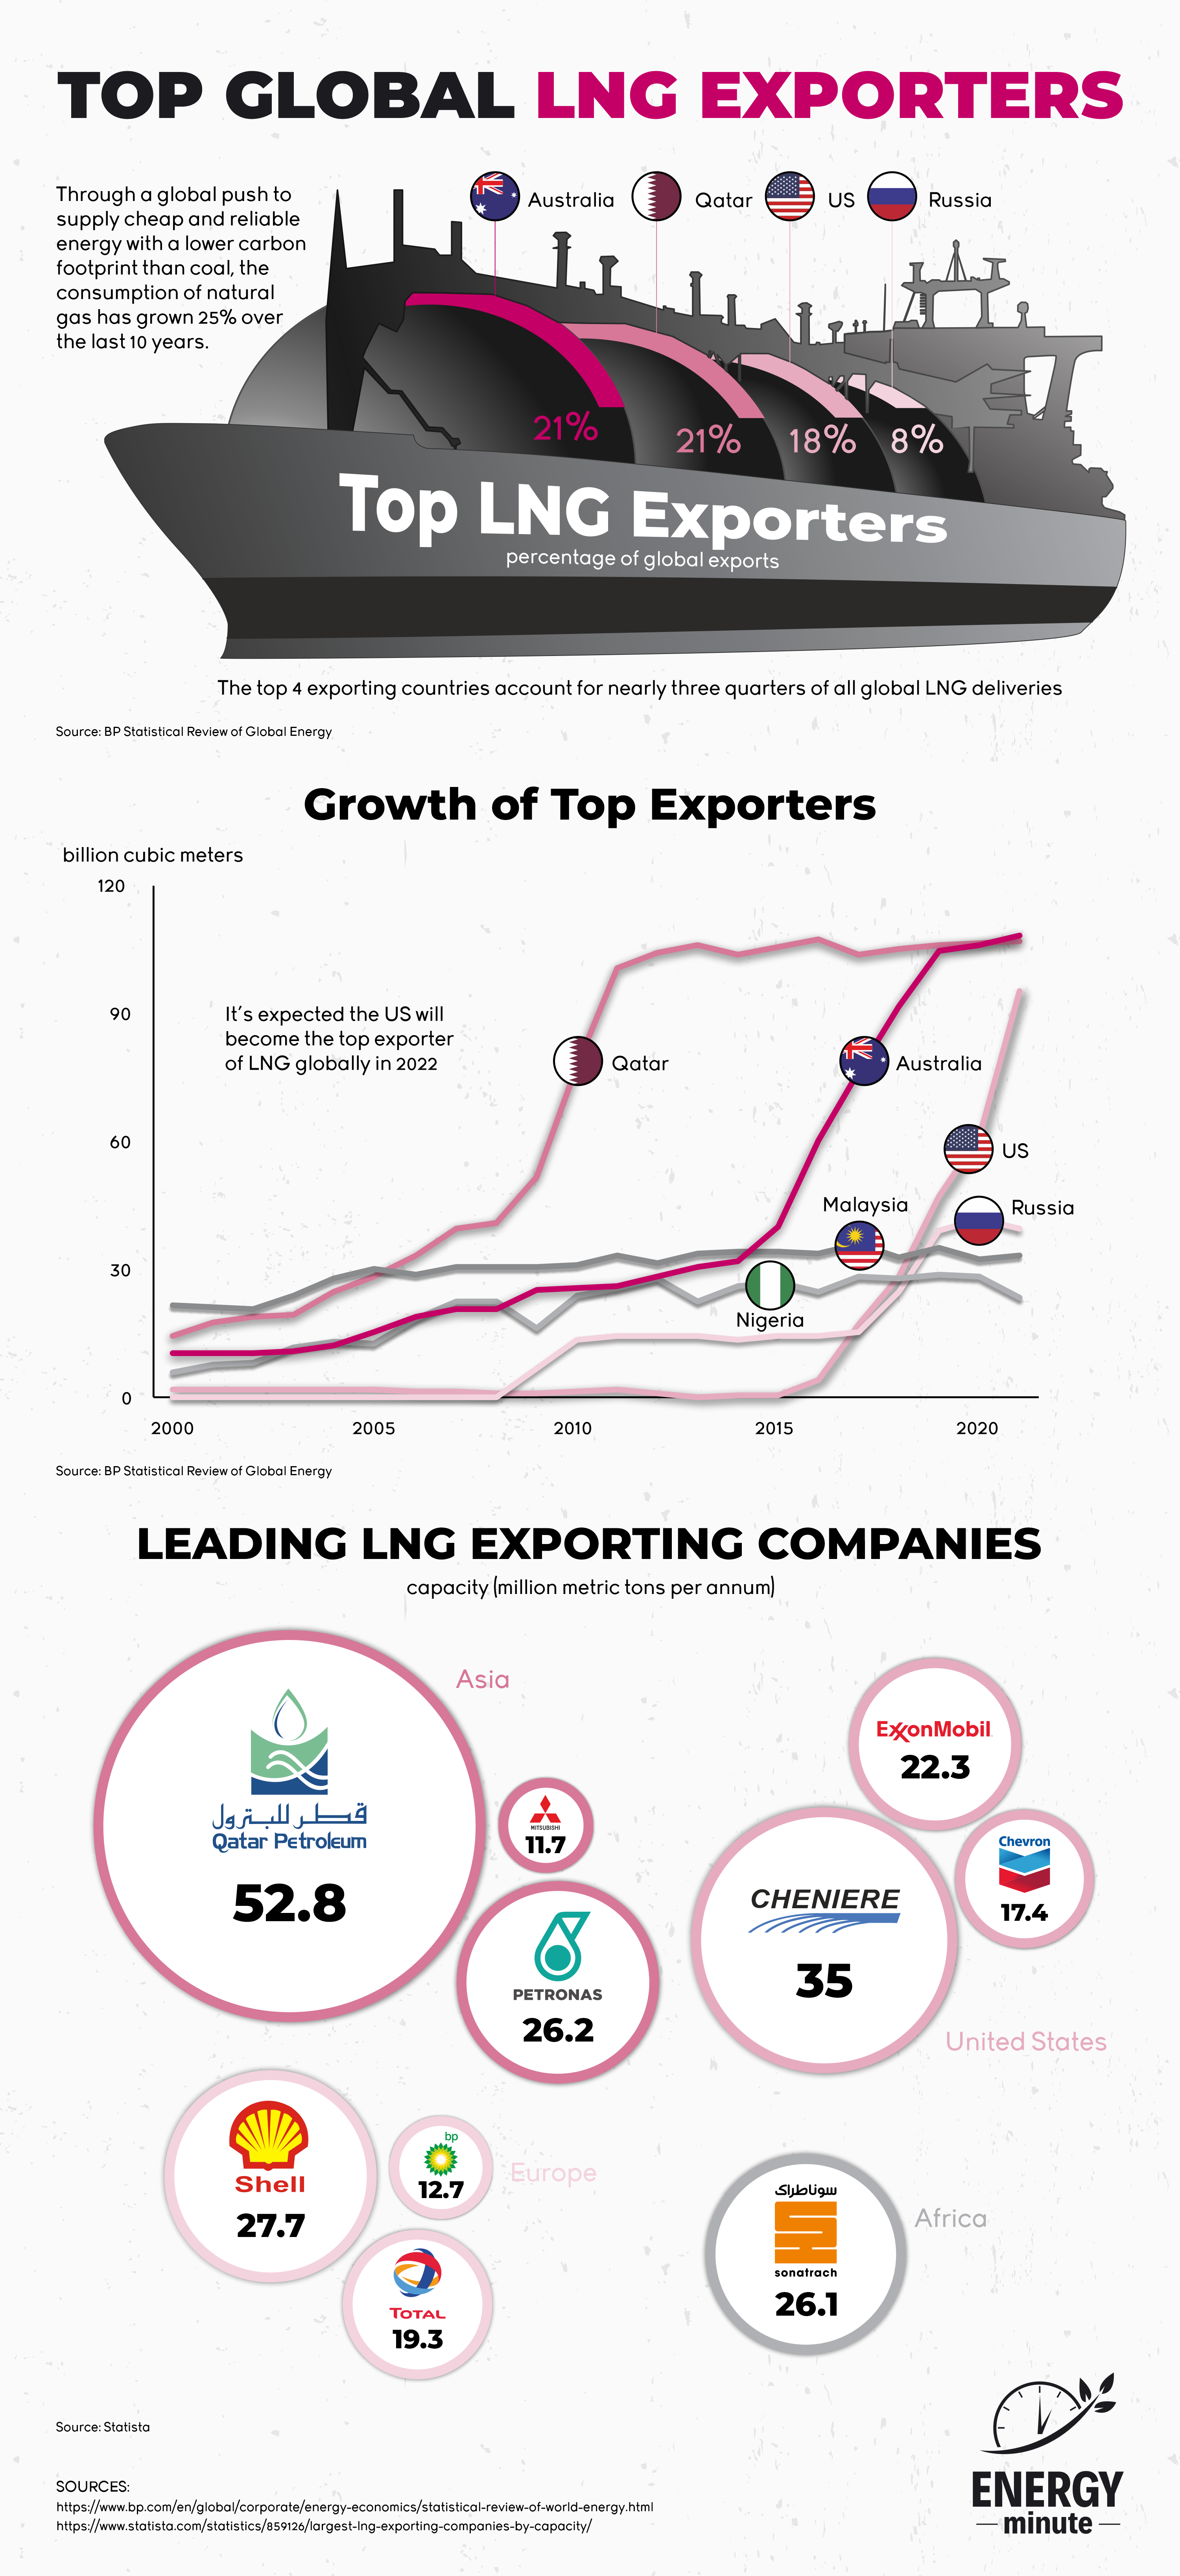 The Top Global LNG Exporters